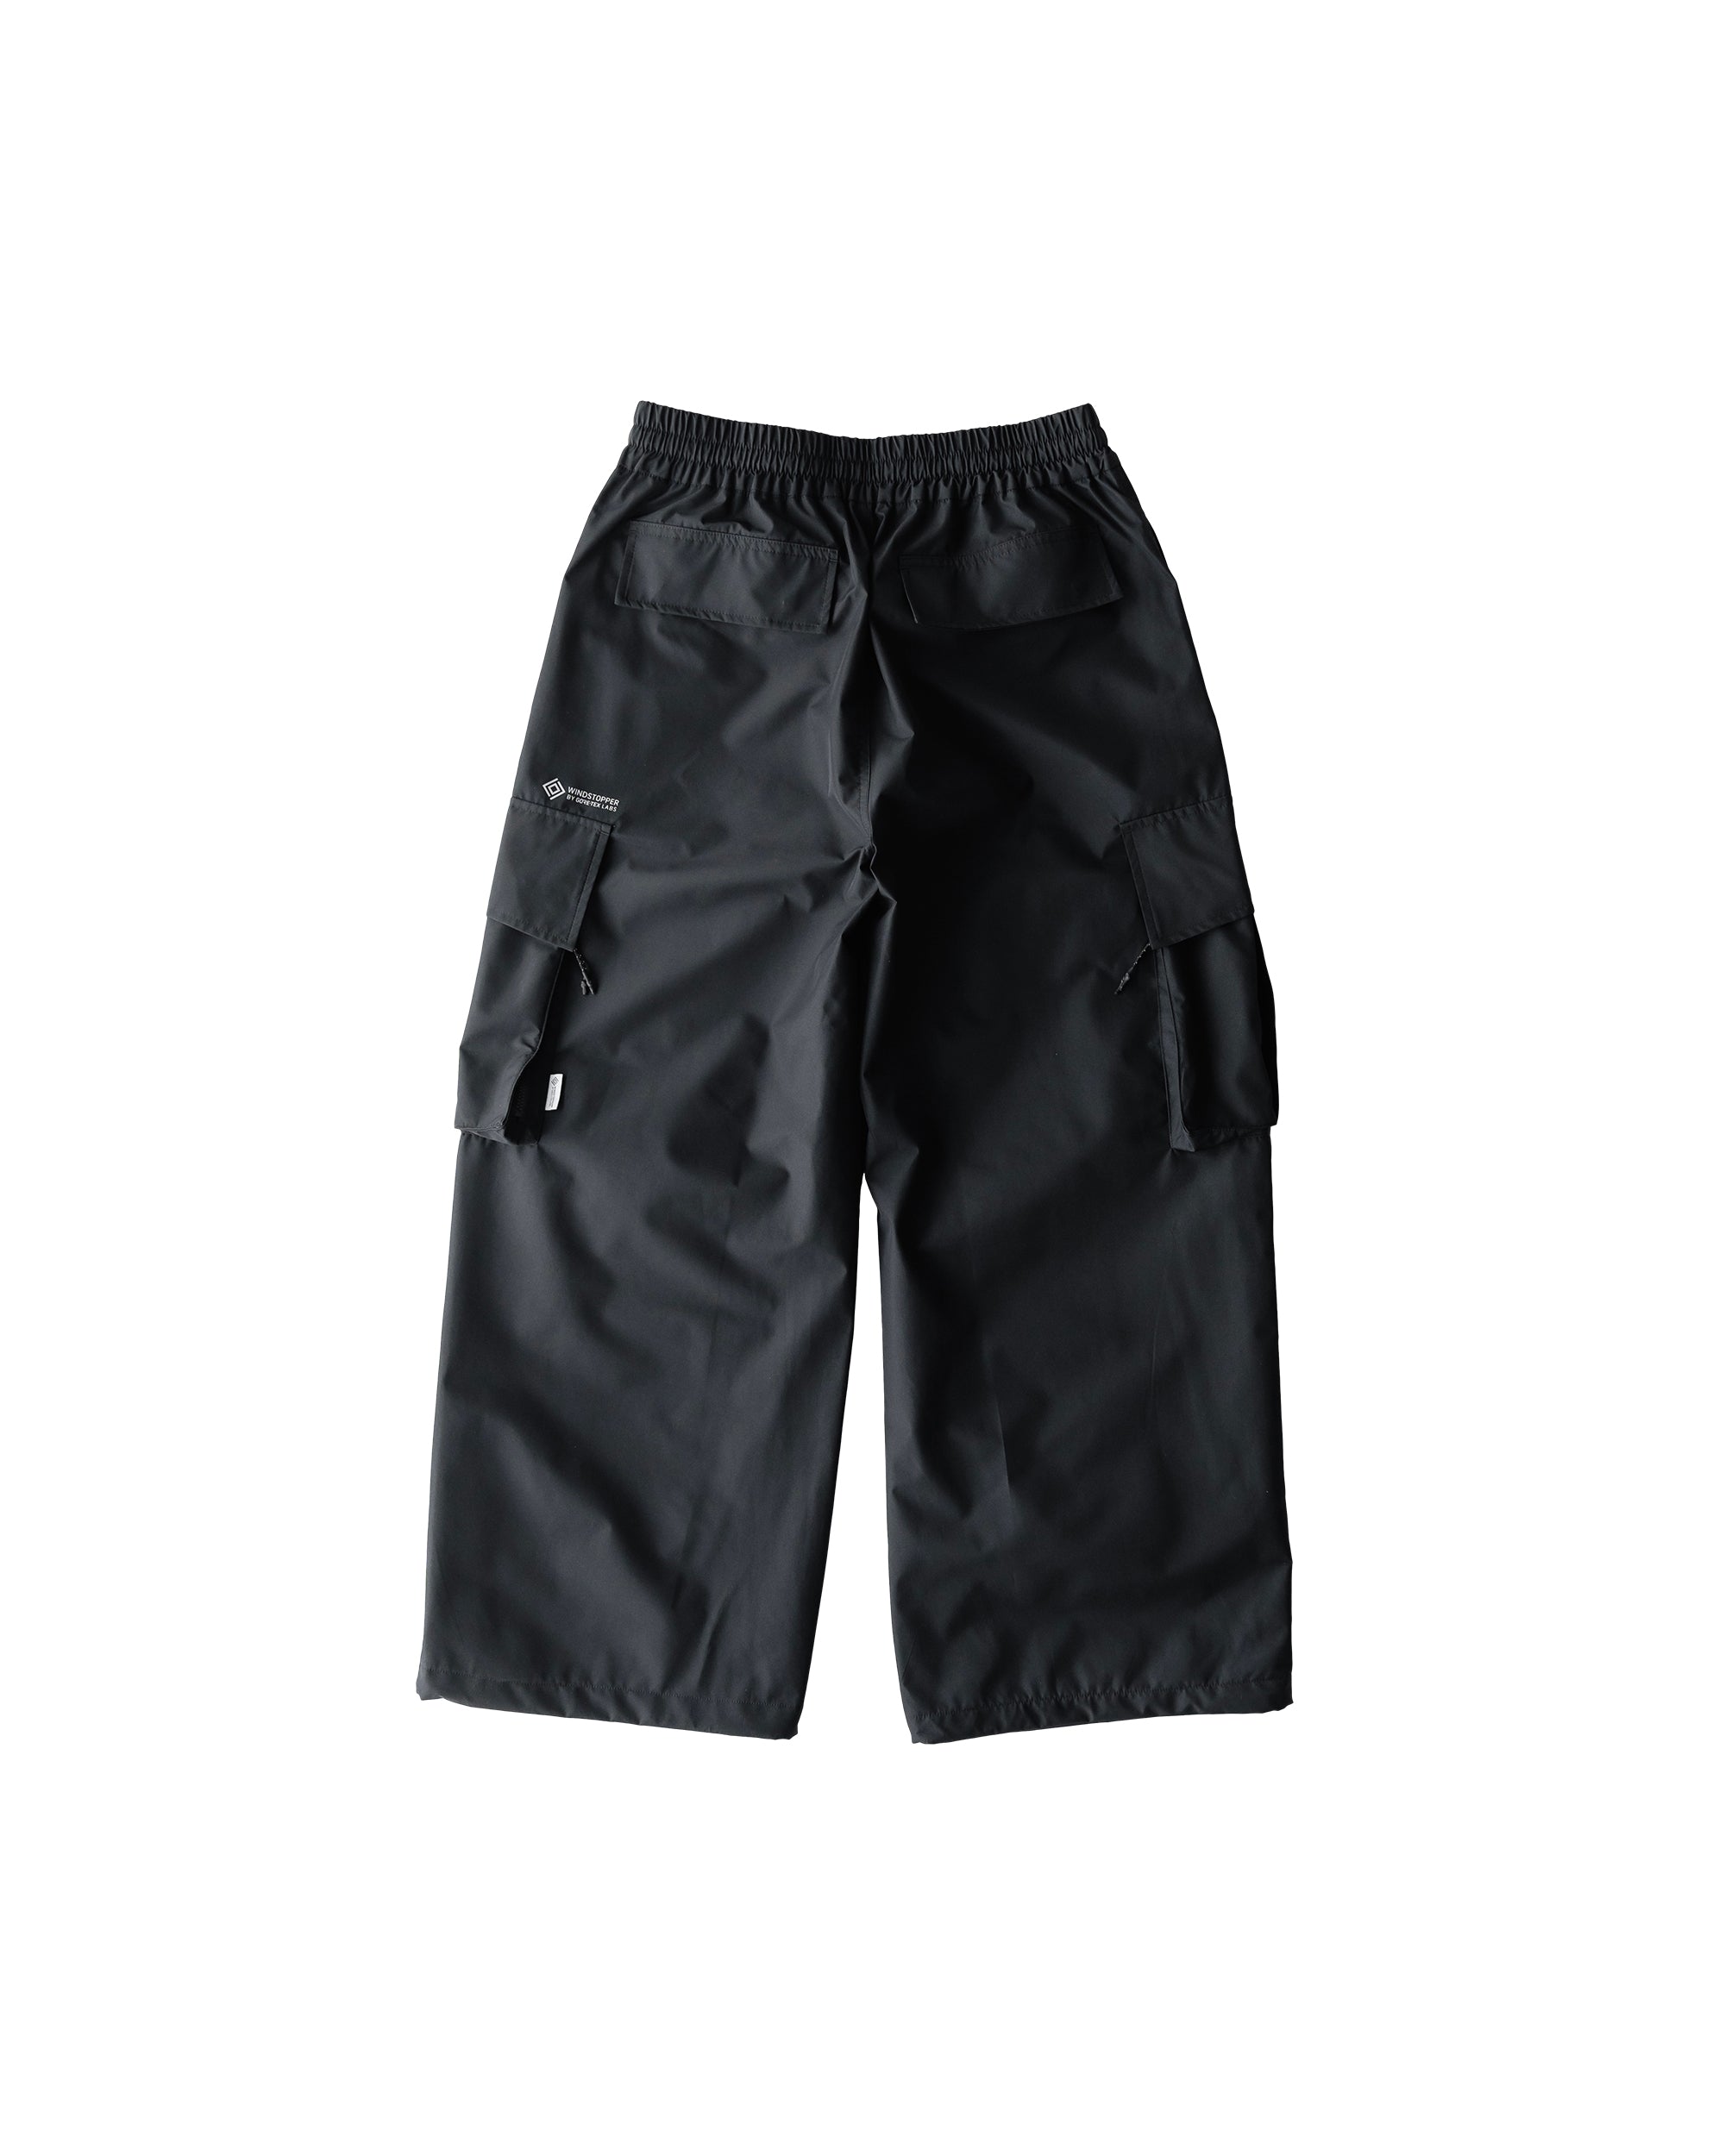 【2.23 fri 20:00- In stock】+phenix WINDSTOPPER® by GORE-TEX LABS CITY MILITARY PANTS